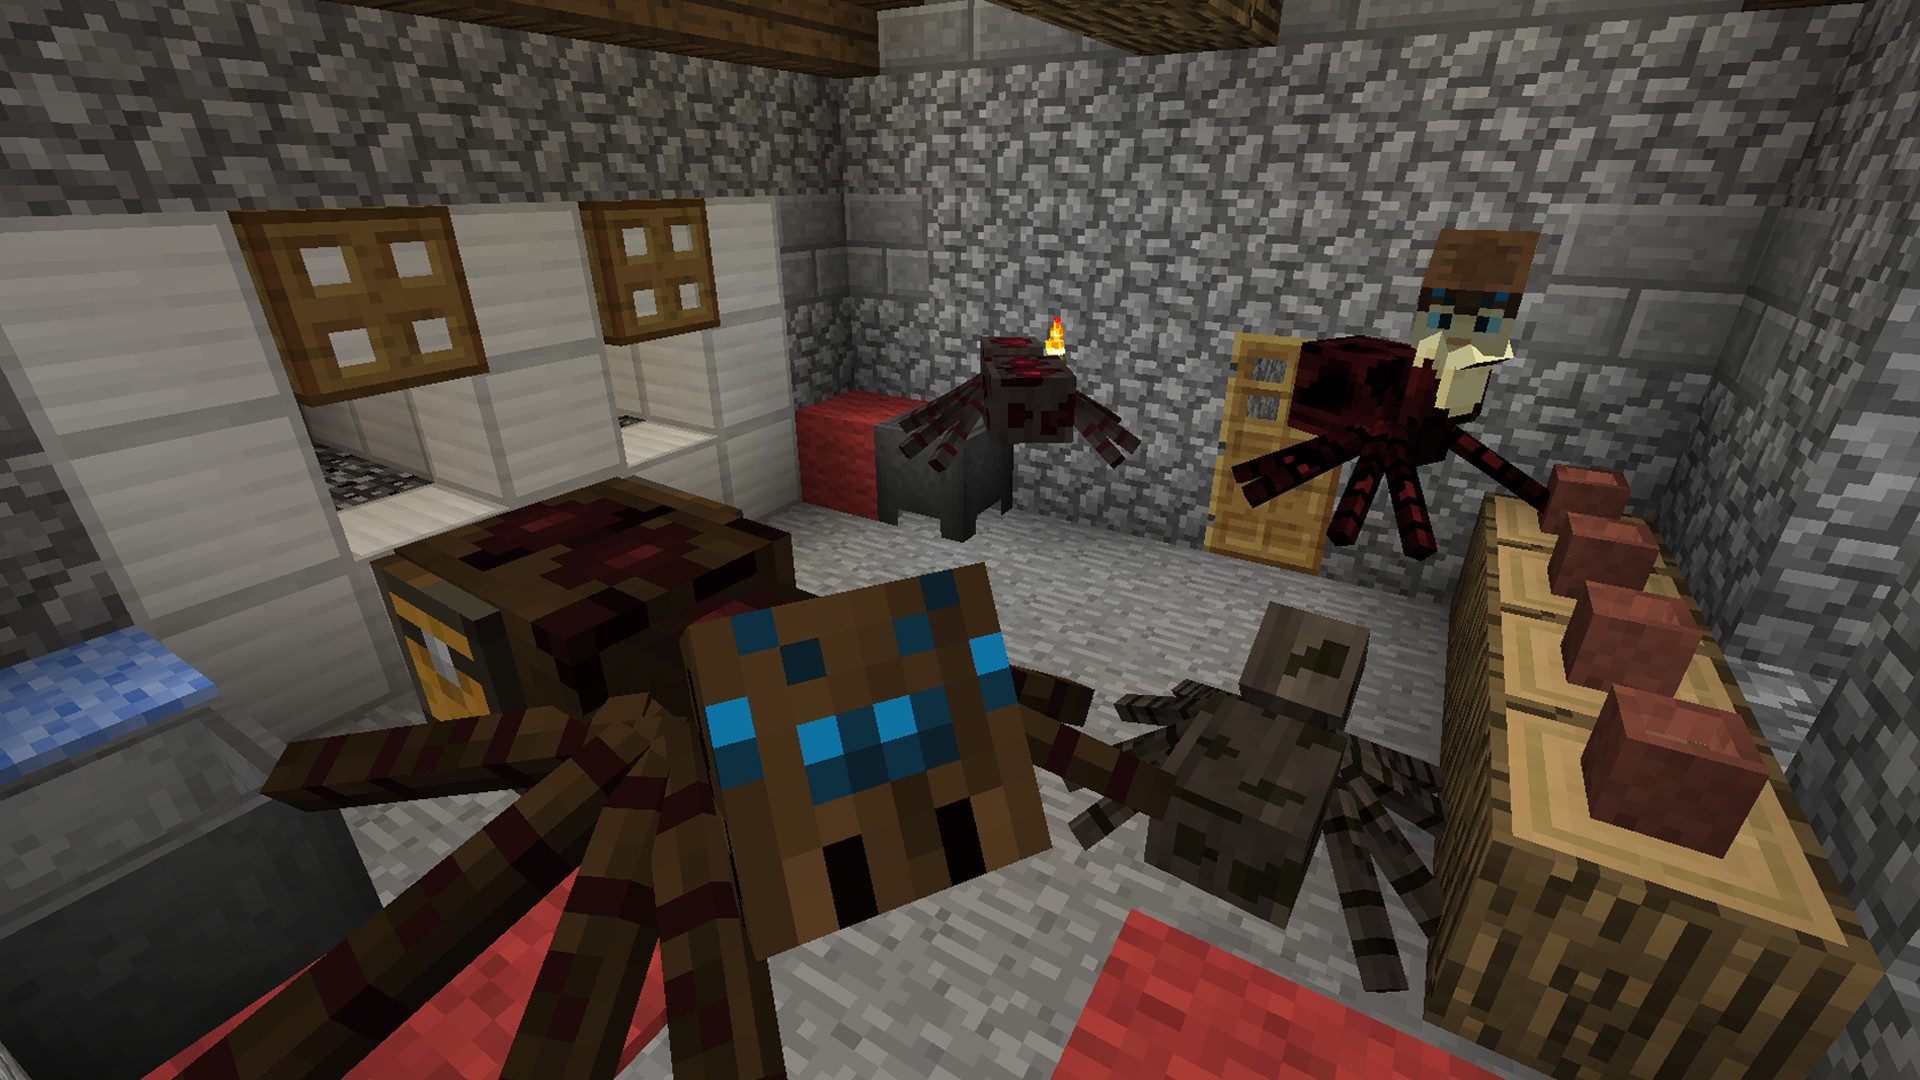 Spider Queen reverses the role of the player in Minecraft by placing them i...